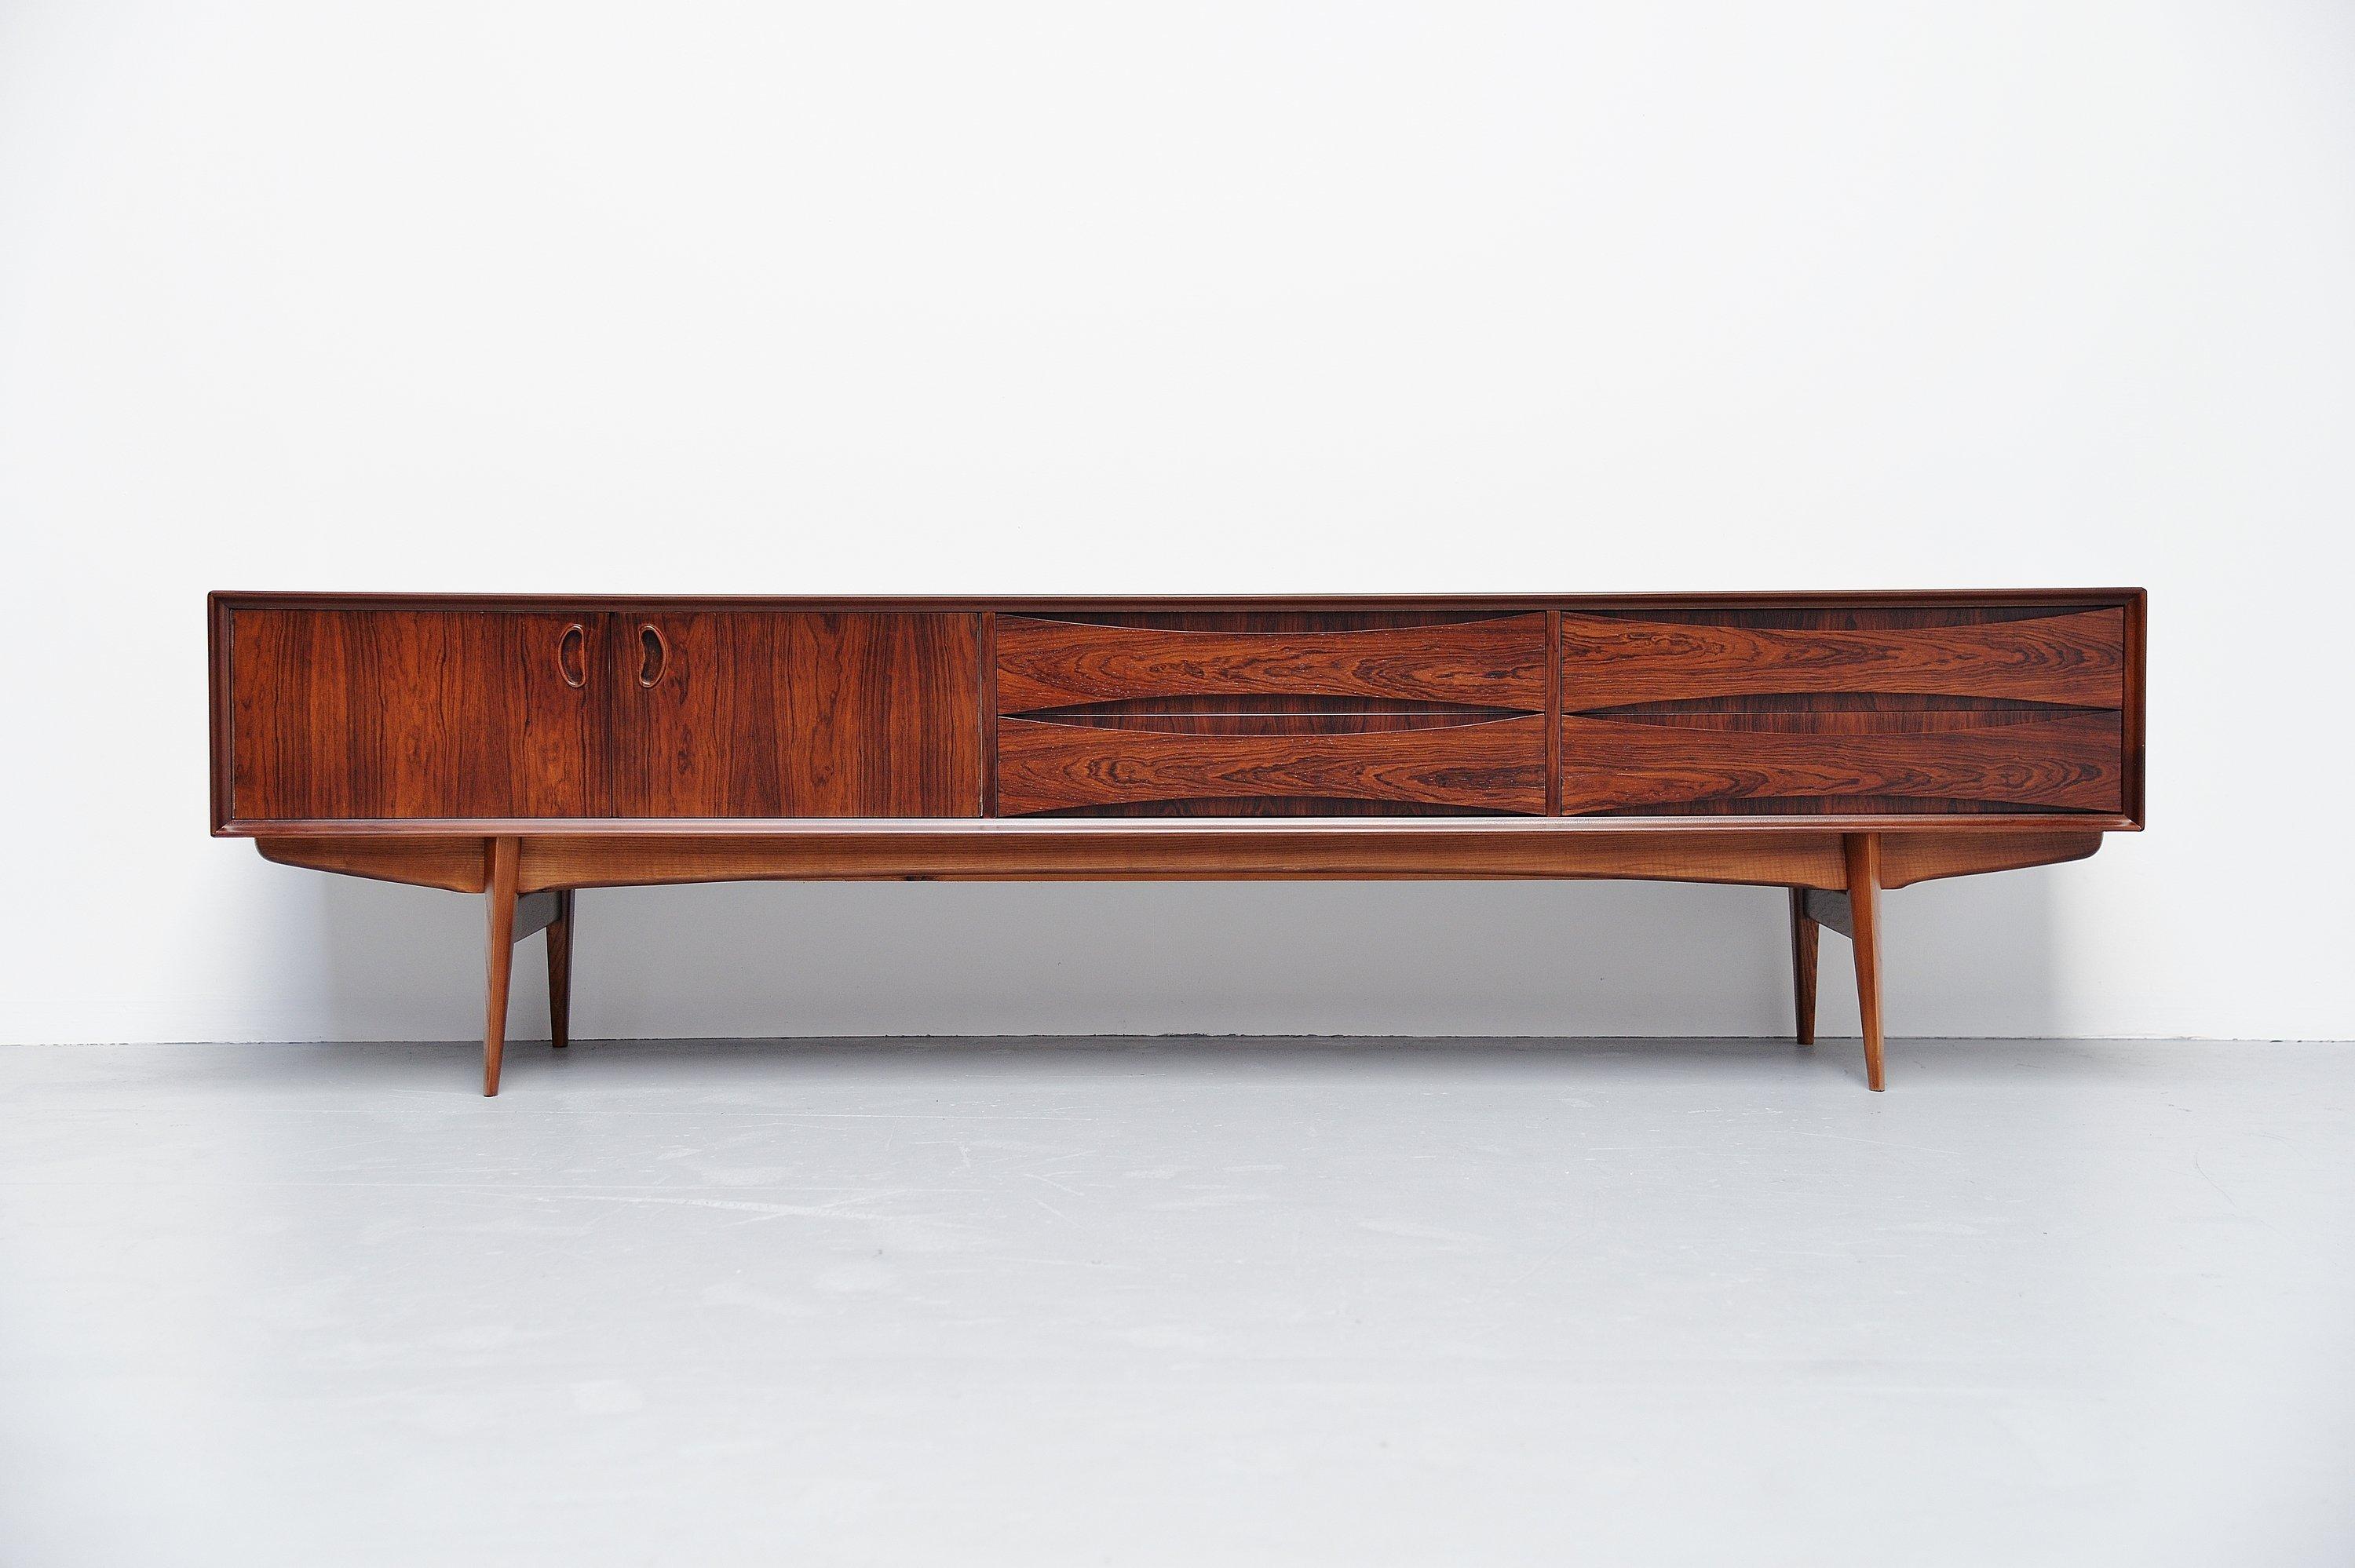 Super quality low sideboard designed by Oswald Vermaercke and manufactured by V-Form, Belgium, 1959. This amazing low credenza has a very nice and warm rosewood color with beautiful deep grain and is fully refinished into perfect condition. The